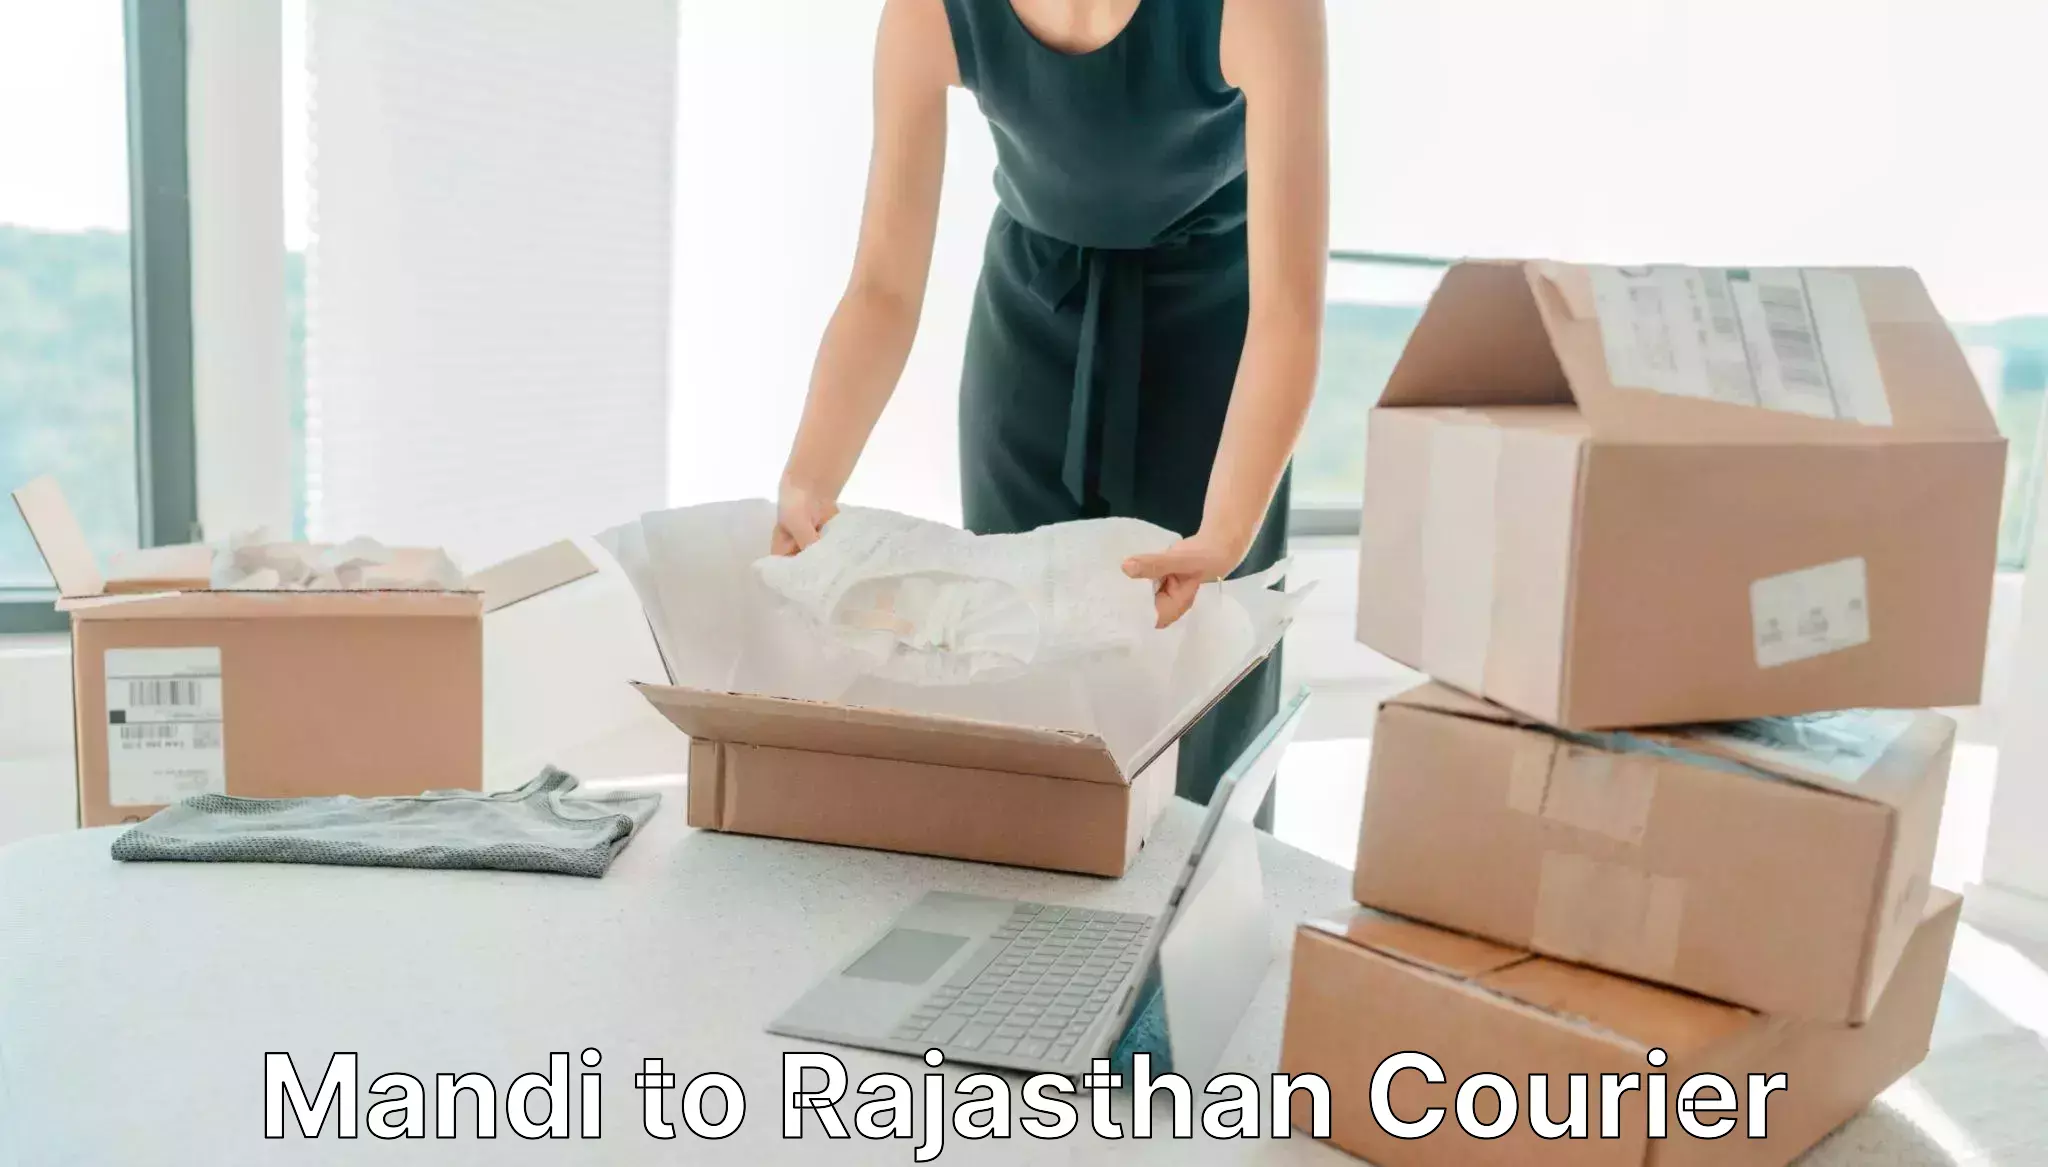 Express delivery network Mandi to Rajasthan